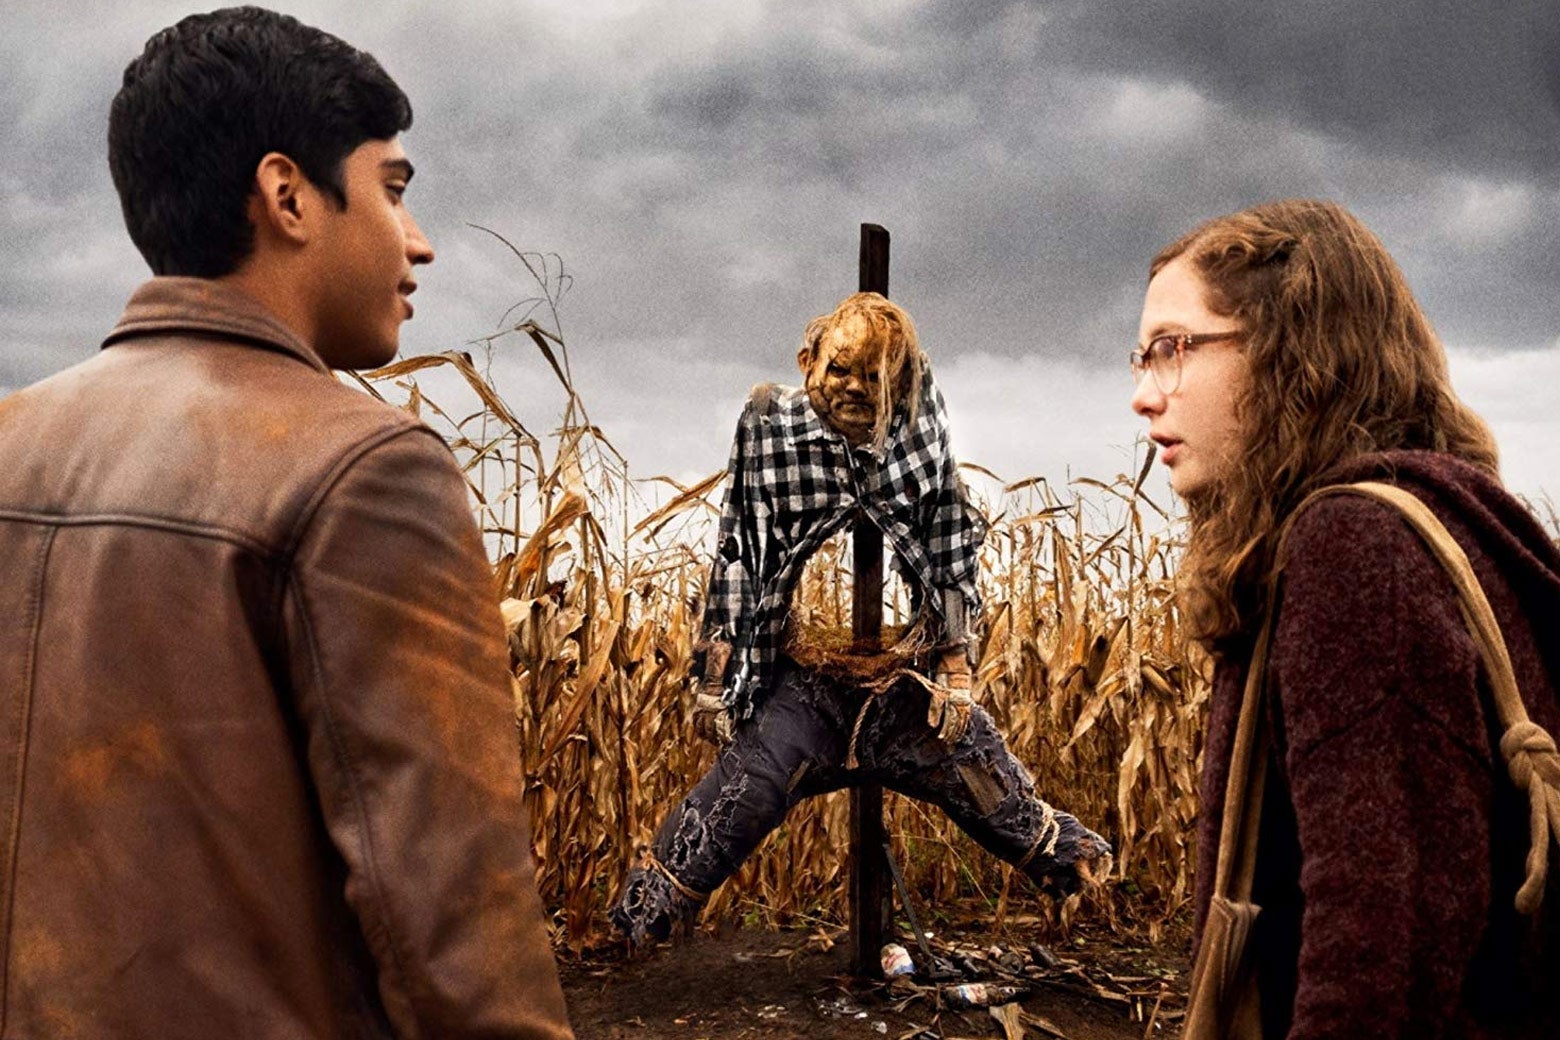 In a scene from the film, two kids stand in front of a menacing scarecrow in a cornfield.